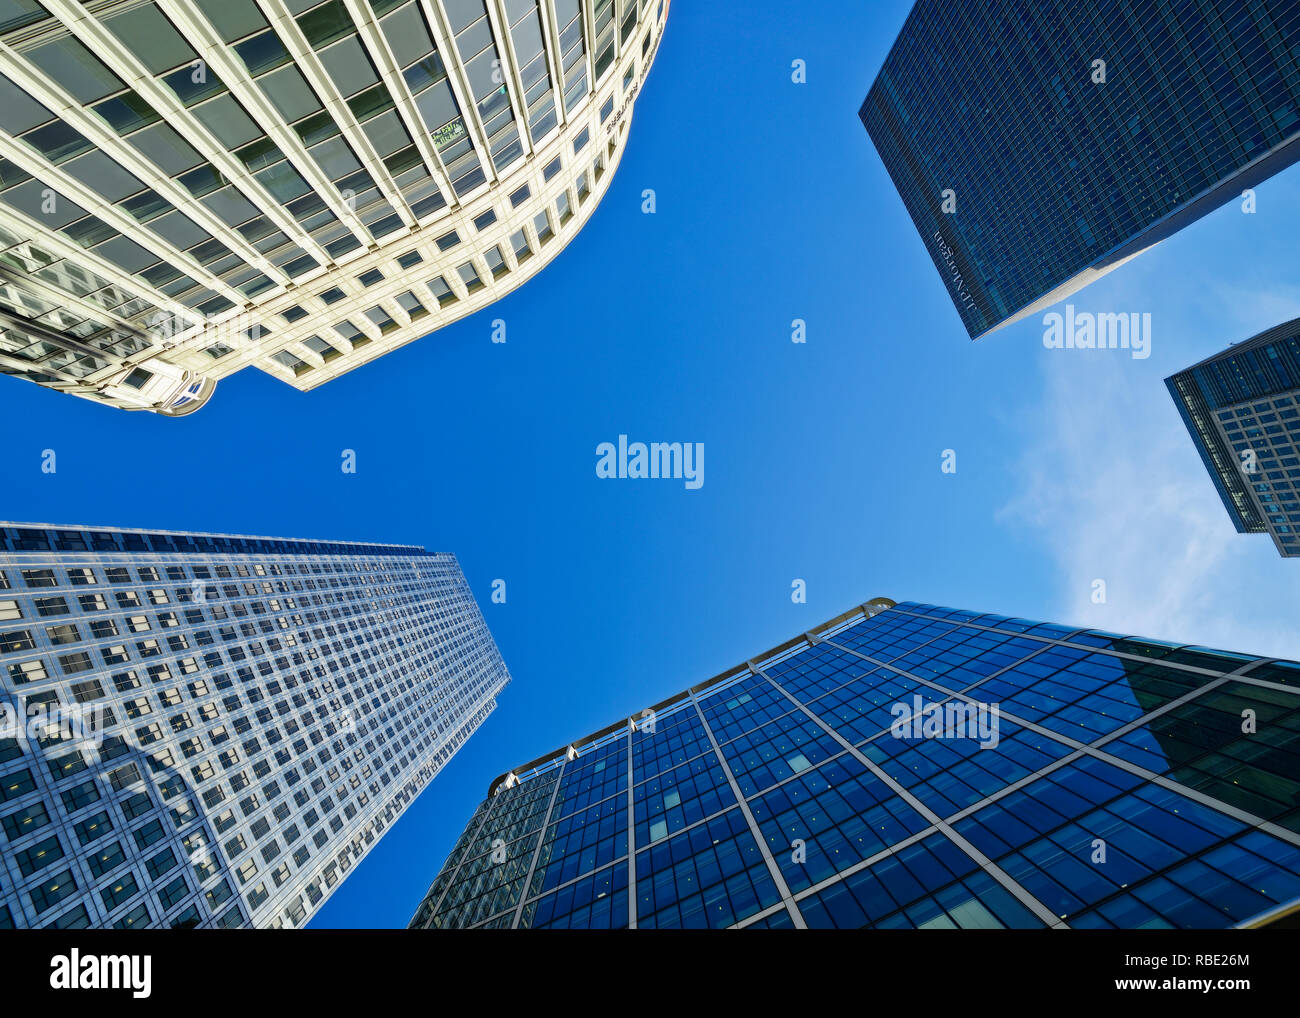 Canary Wharf, low angle View de Cabot Square, London, United Kingdom Banque D'Images